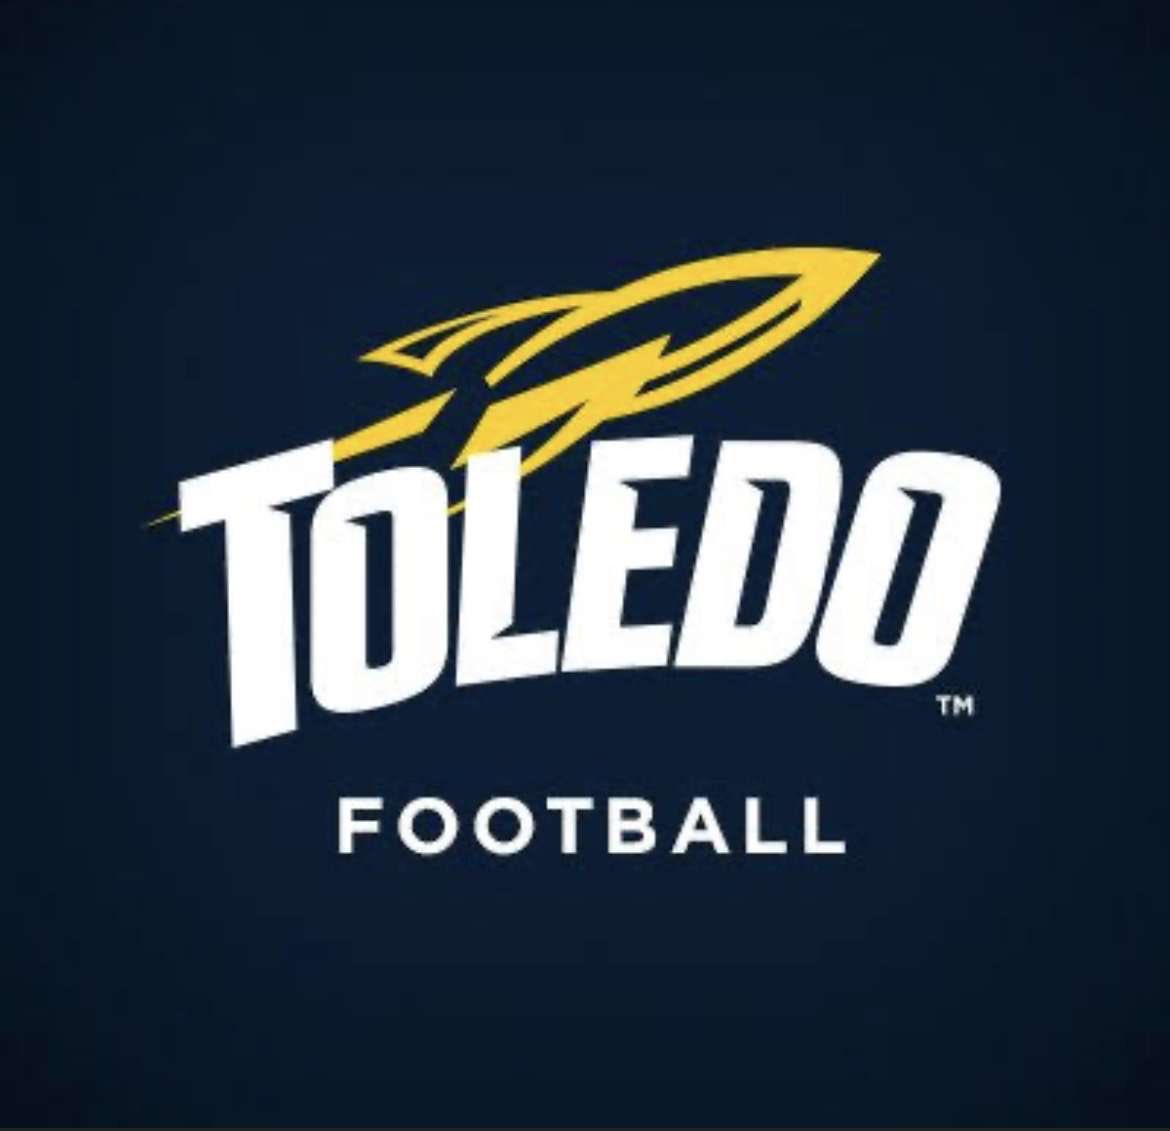 After a great conversation with @CoachFlemWR I’m blessed to receive my 1st offer from the University of Toledo @CoachKHill34 @goulart_ar @coachvpaschal @EarlGill10 @ToledoFB